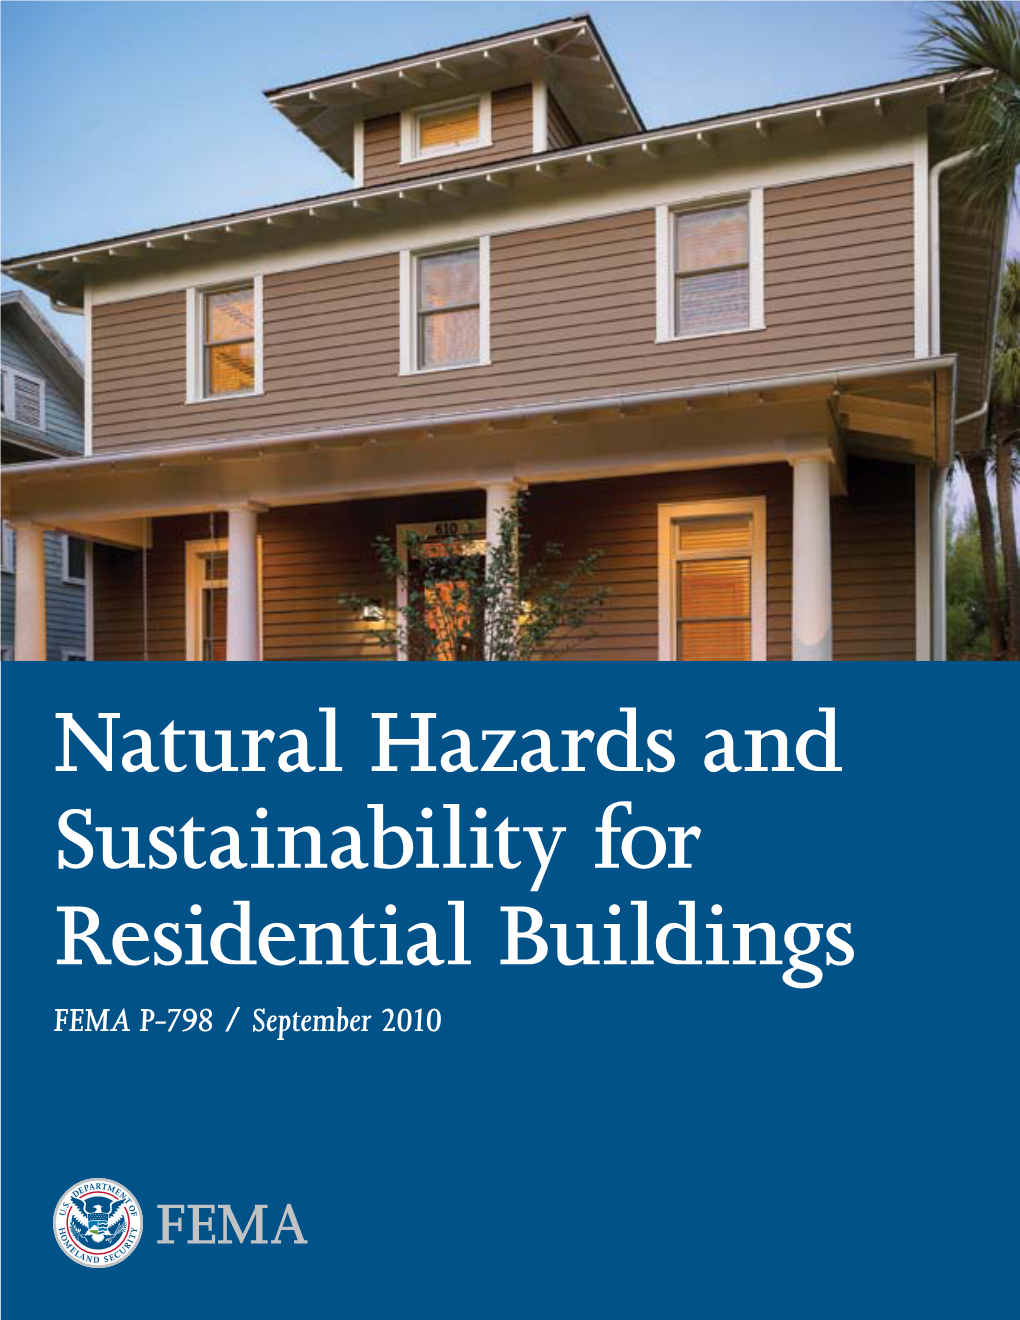 Natural Hazards and Sustainability for Residential Buildings FEMA P-798 / September 2010